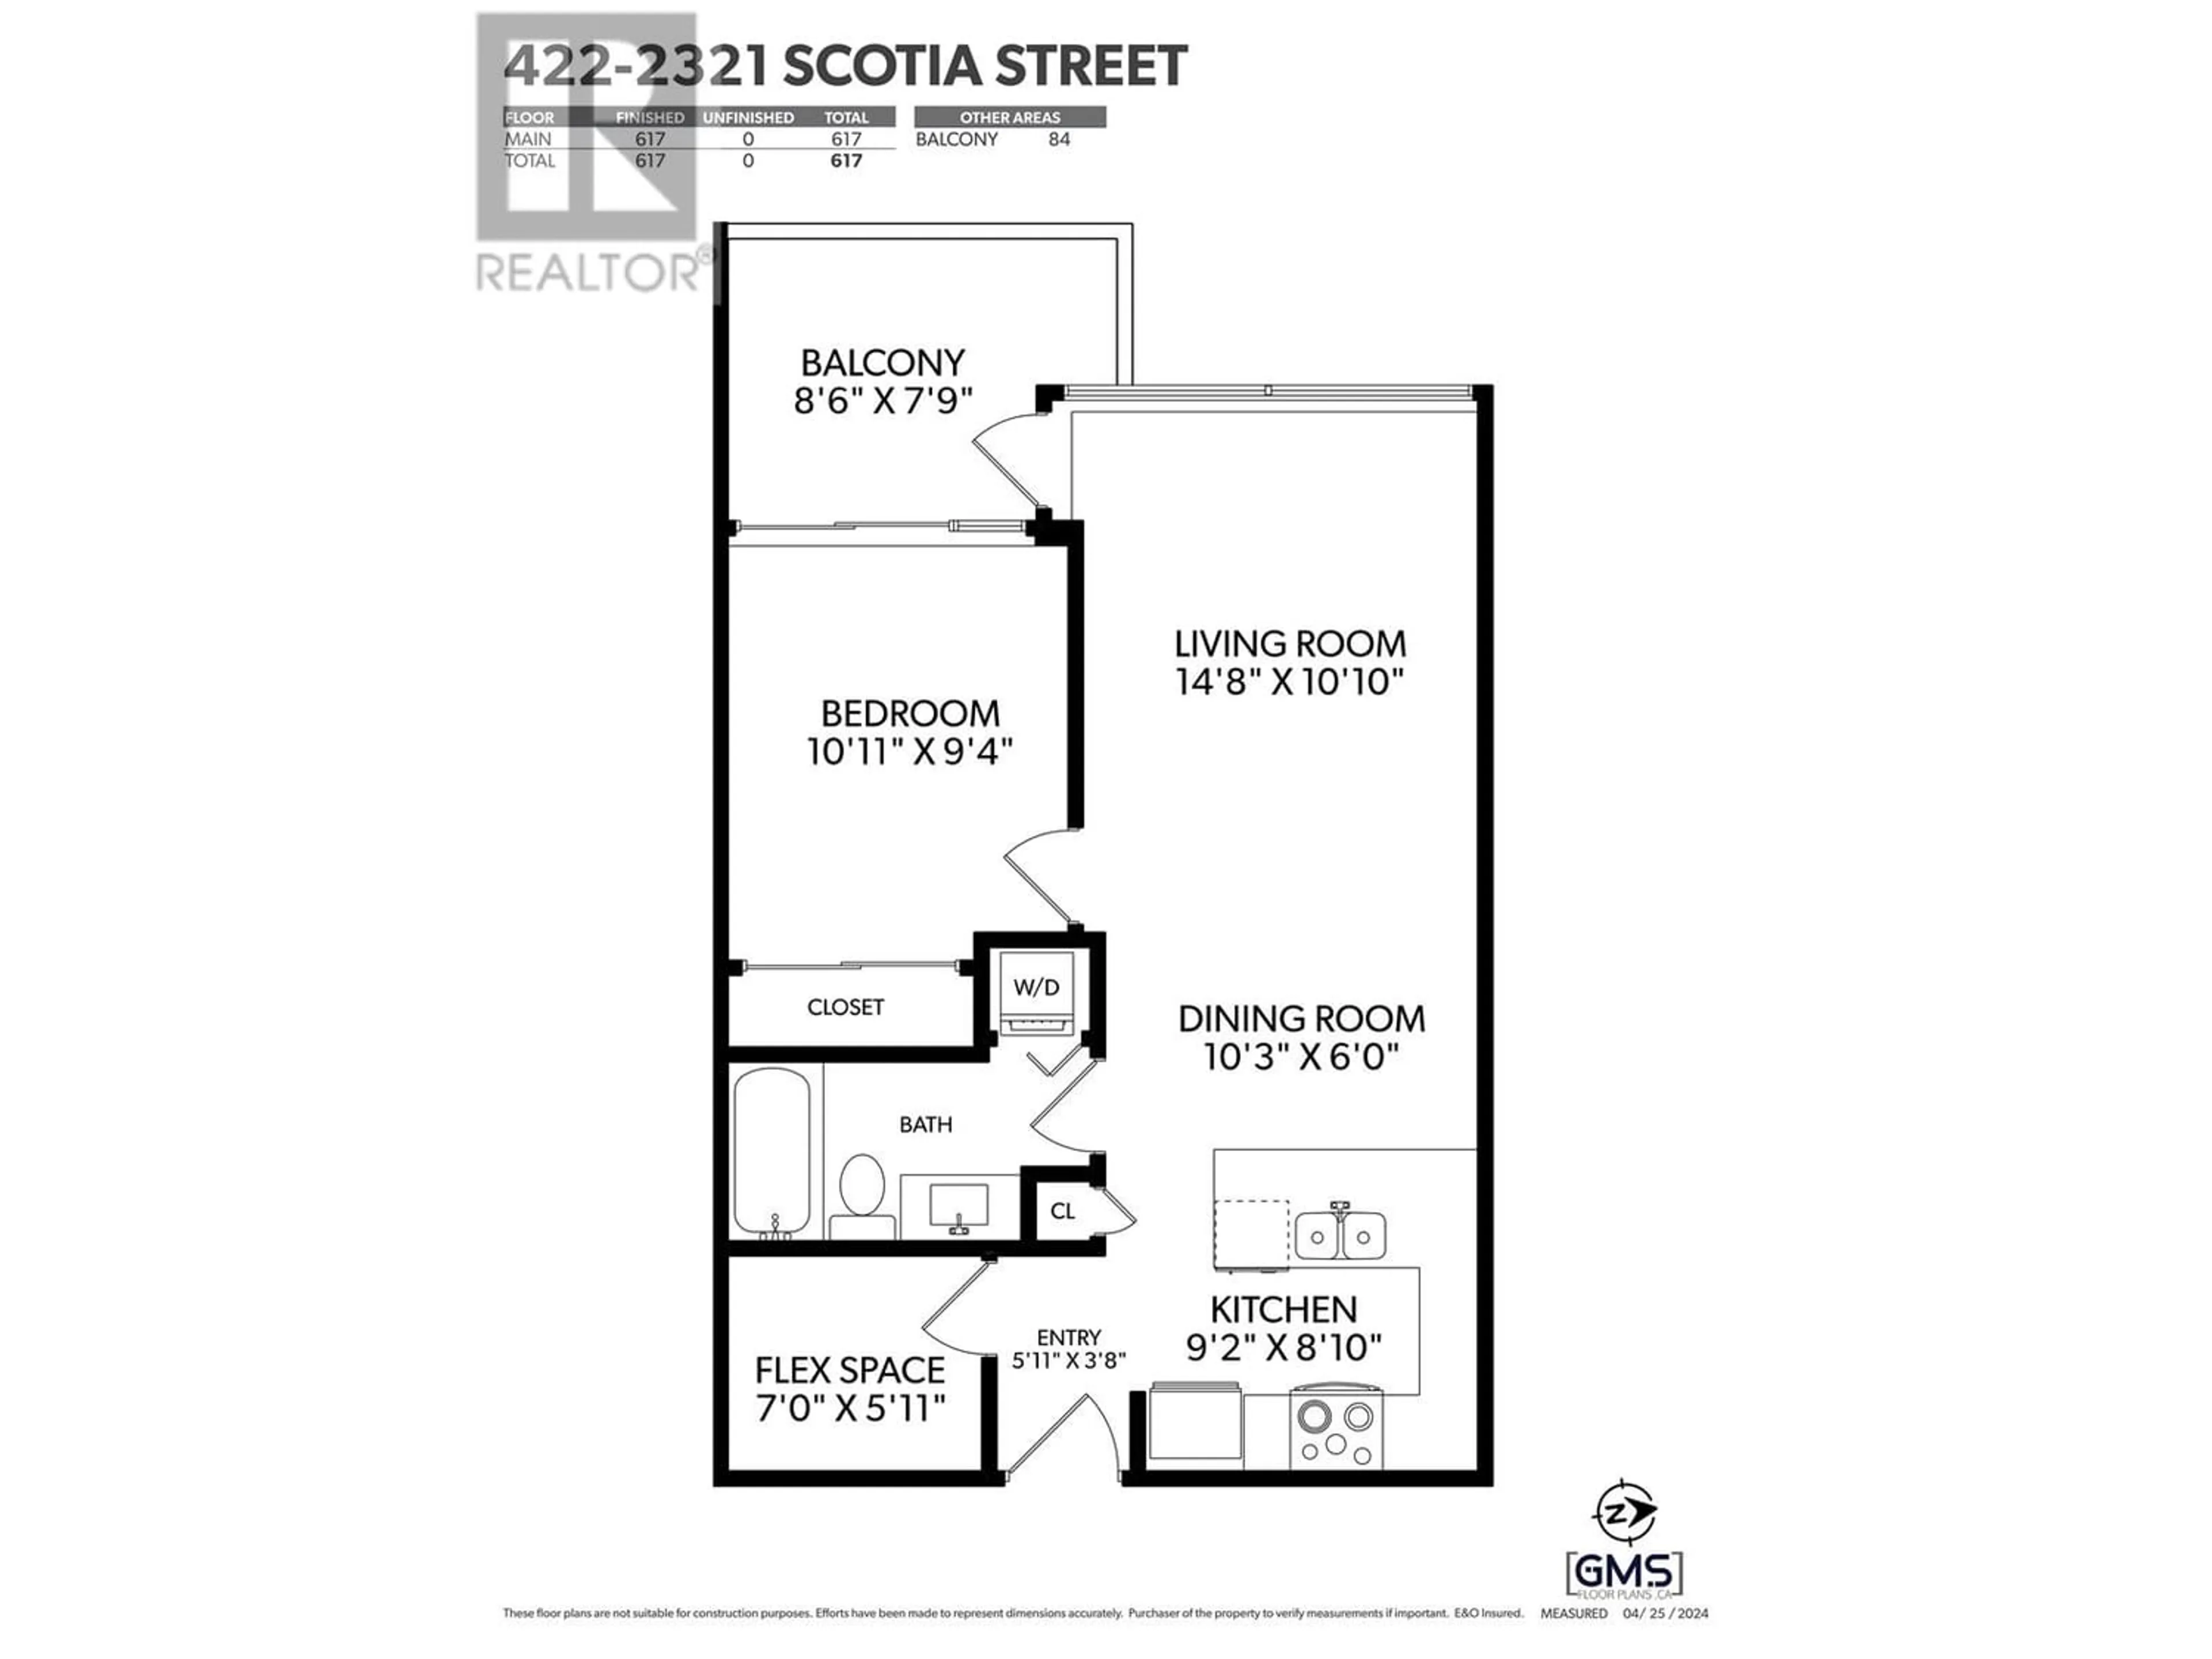 Floor plan for 422 2321 SCOTIA STREET, Vancouver British Columbia V5T0A8